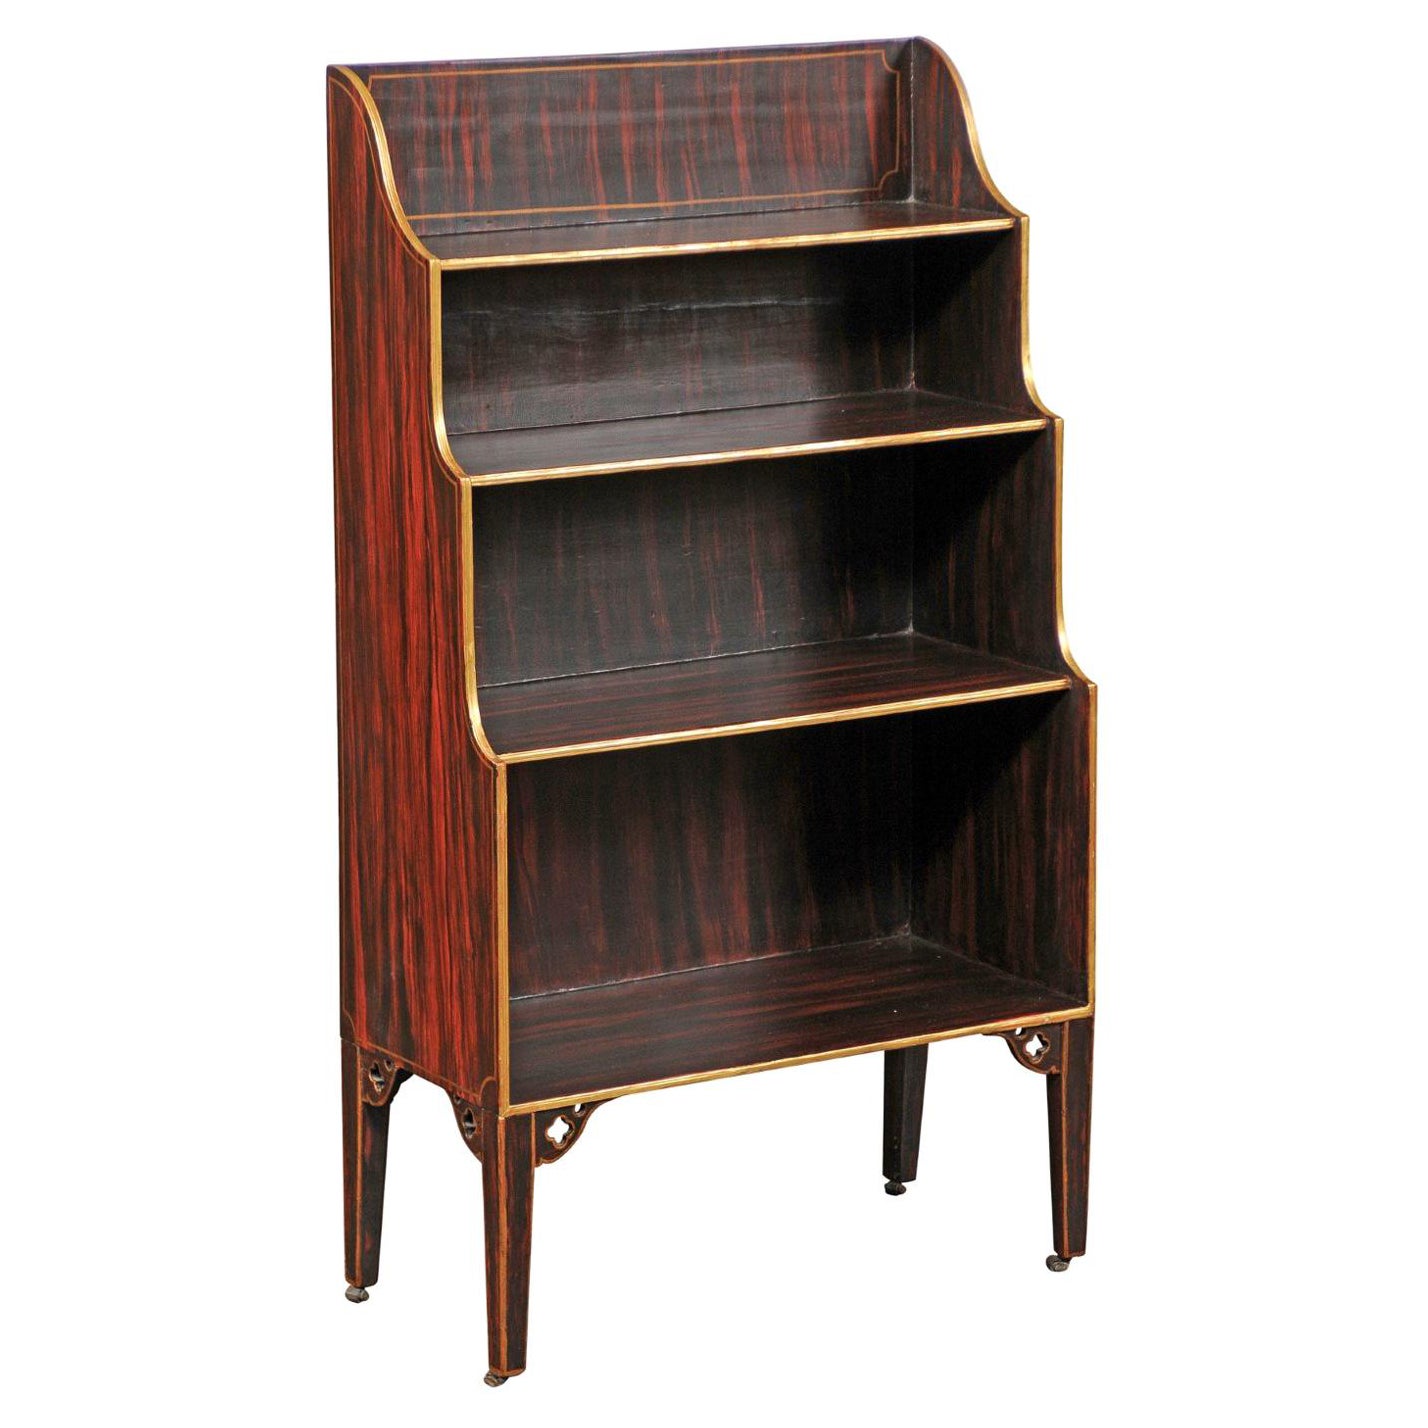 English 1850s Faux-Painted Waterfall Bookcase with Gilt Accents and Tapered Legs For Sale